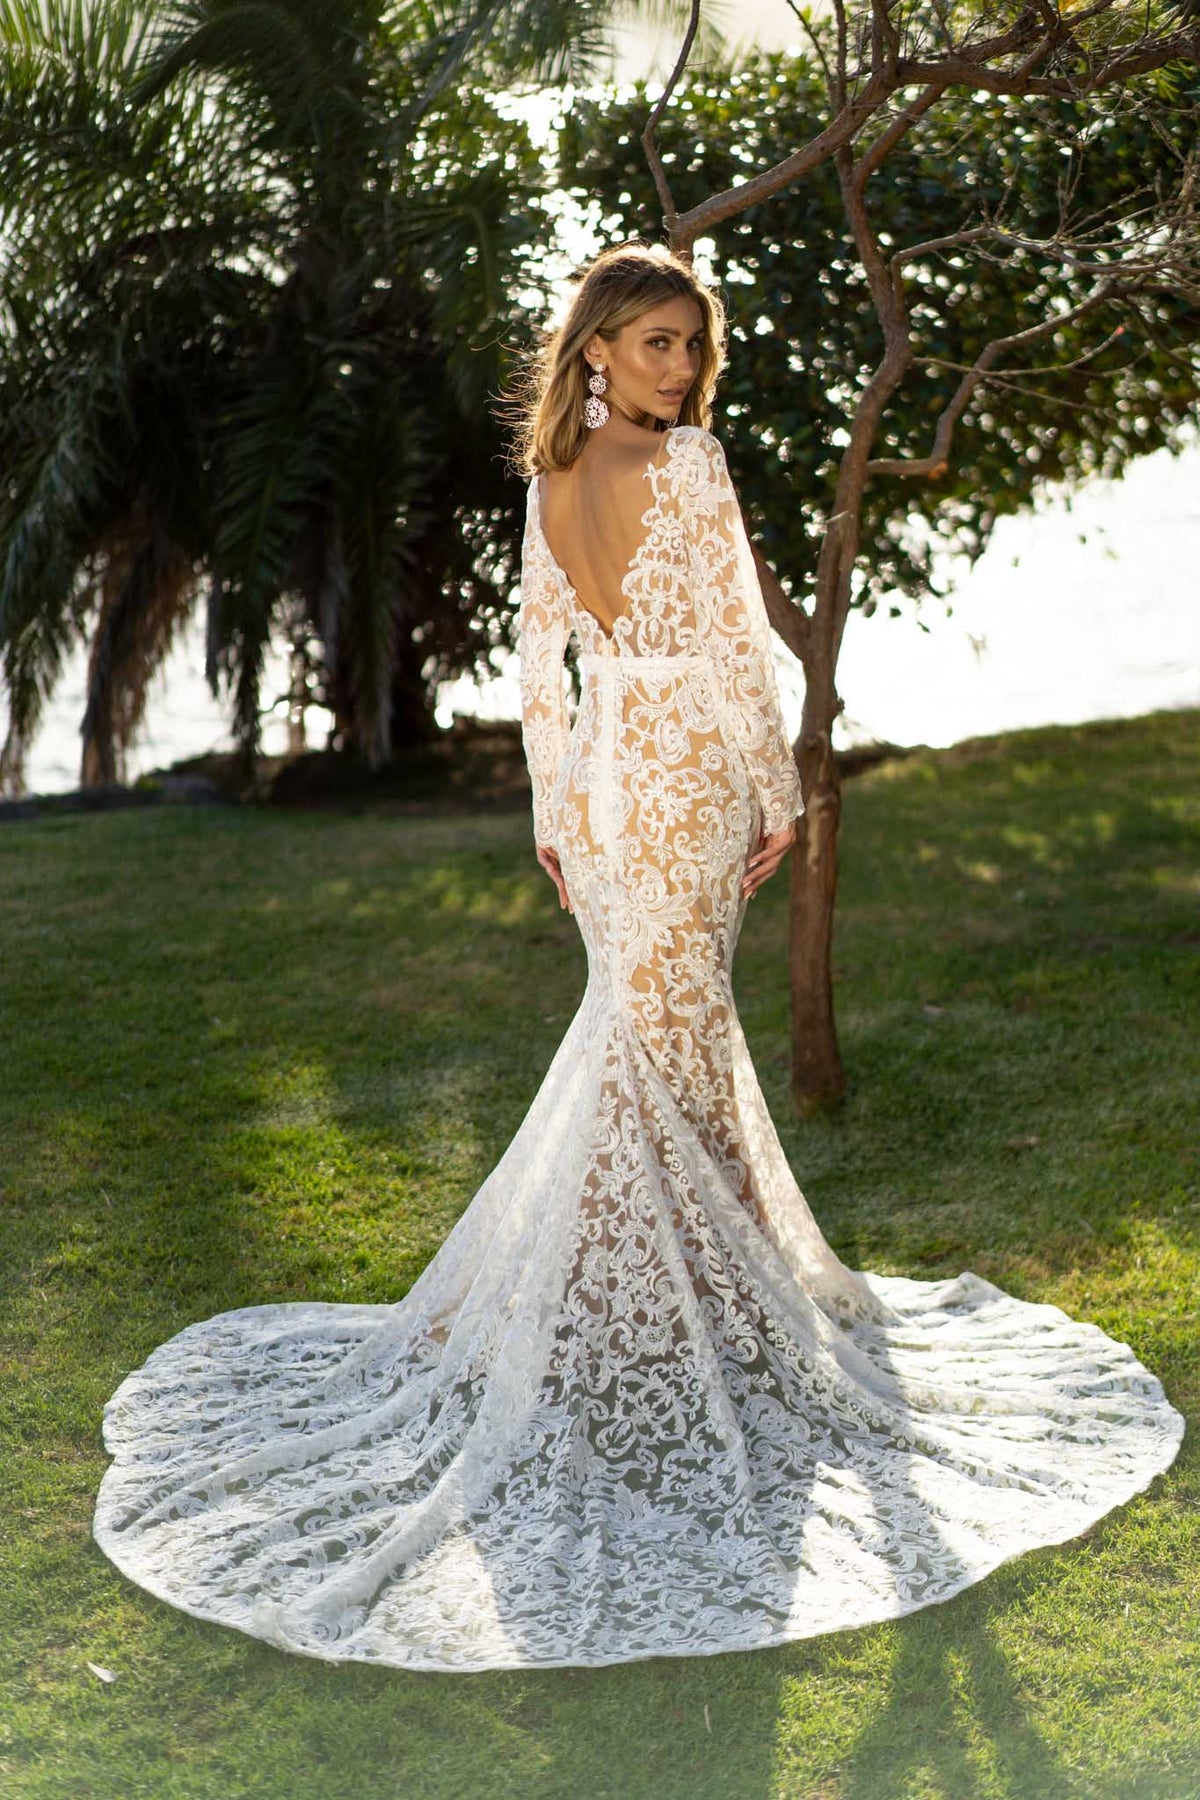 Long Sleeve Wedding Gown featuring White Vintage Inspired Lace Pattern with Chai Coloured Underlay in Sheer Illusion Design, Long Sleeves with Scalloped Edge, Fit and Flare Silhouette, Illusion V Plunging Neckline, Low Back and Sweep Train